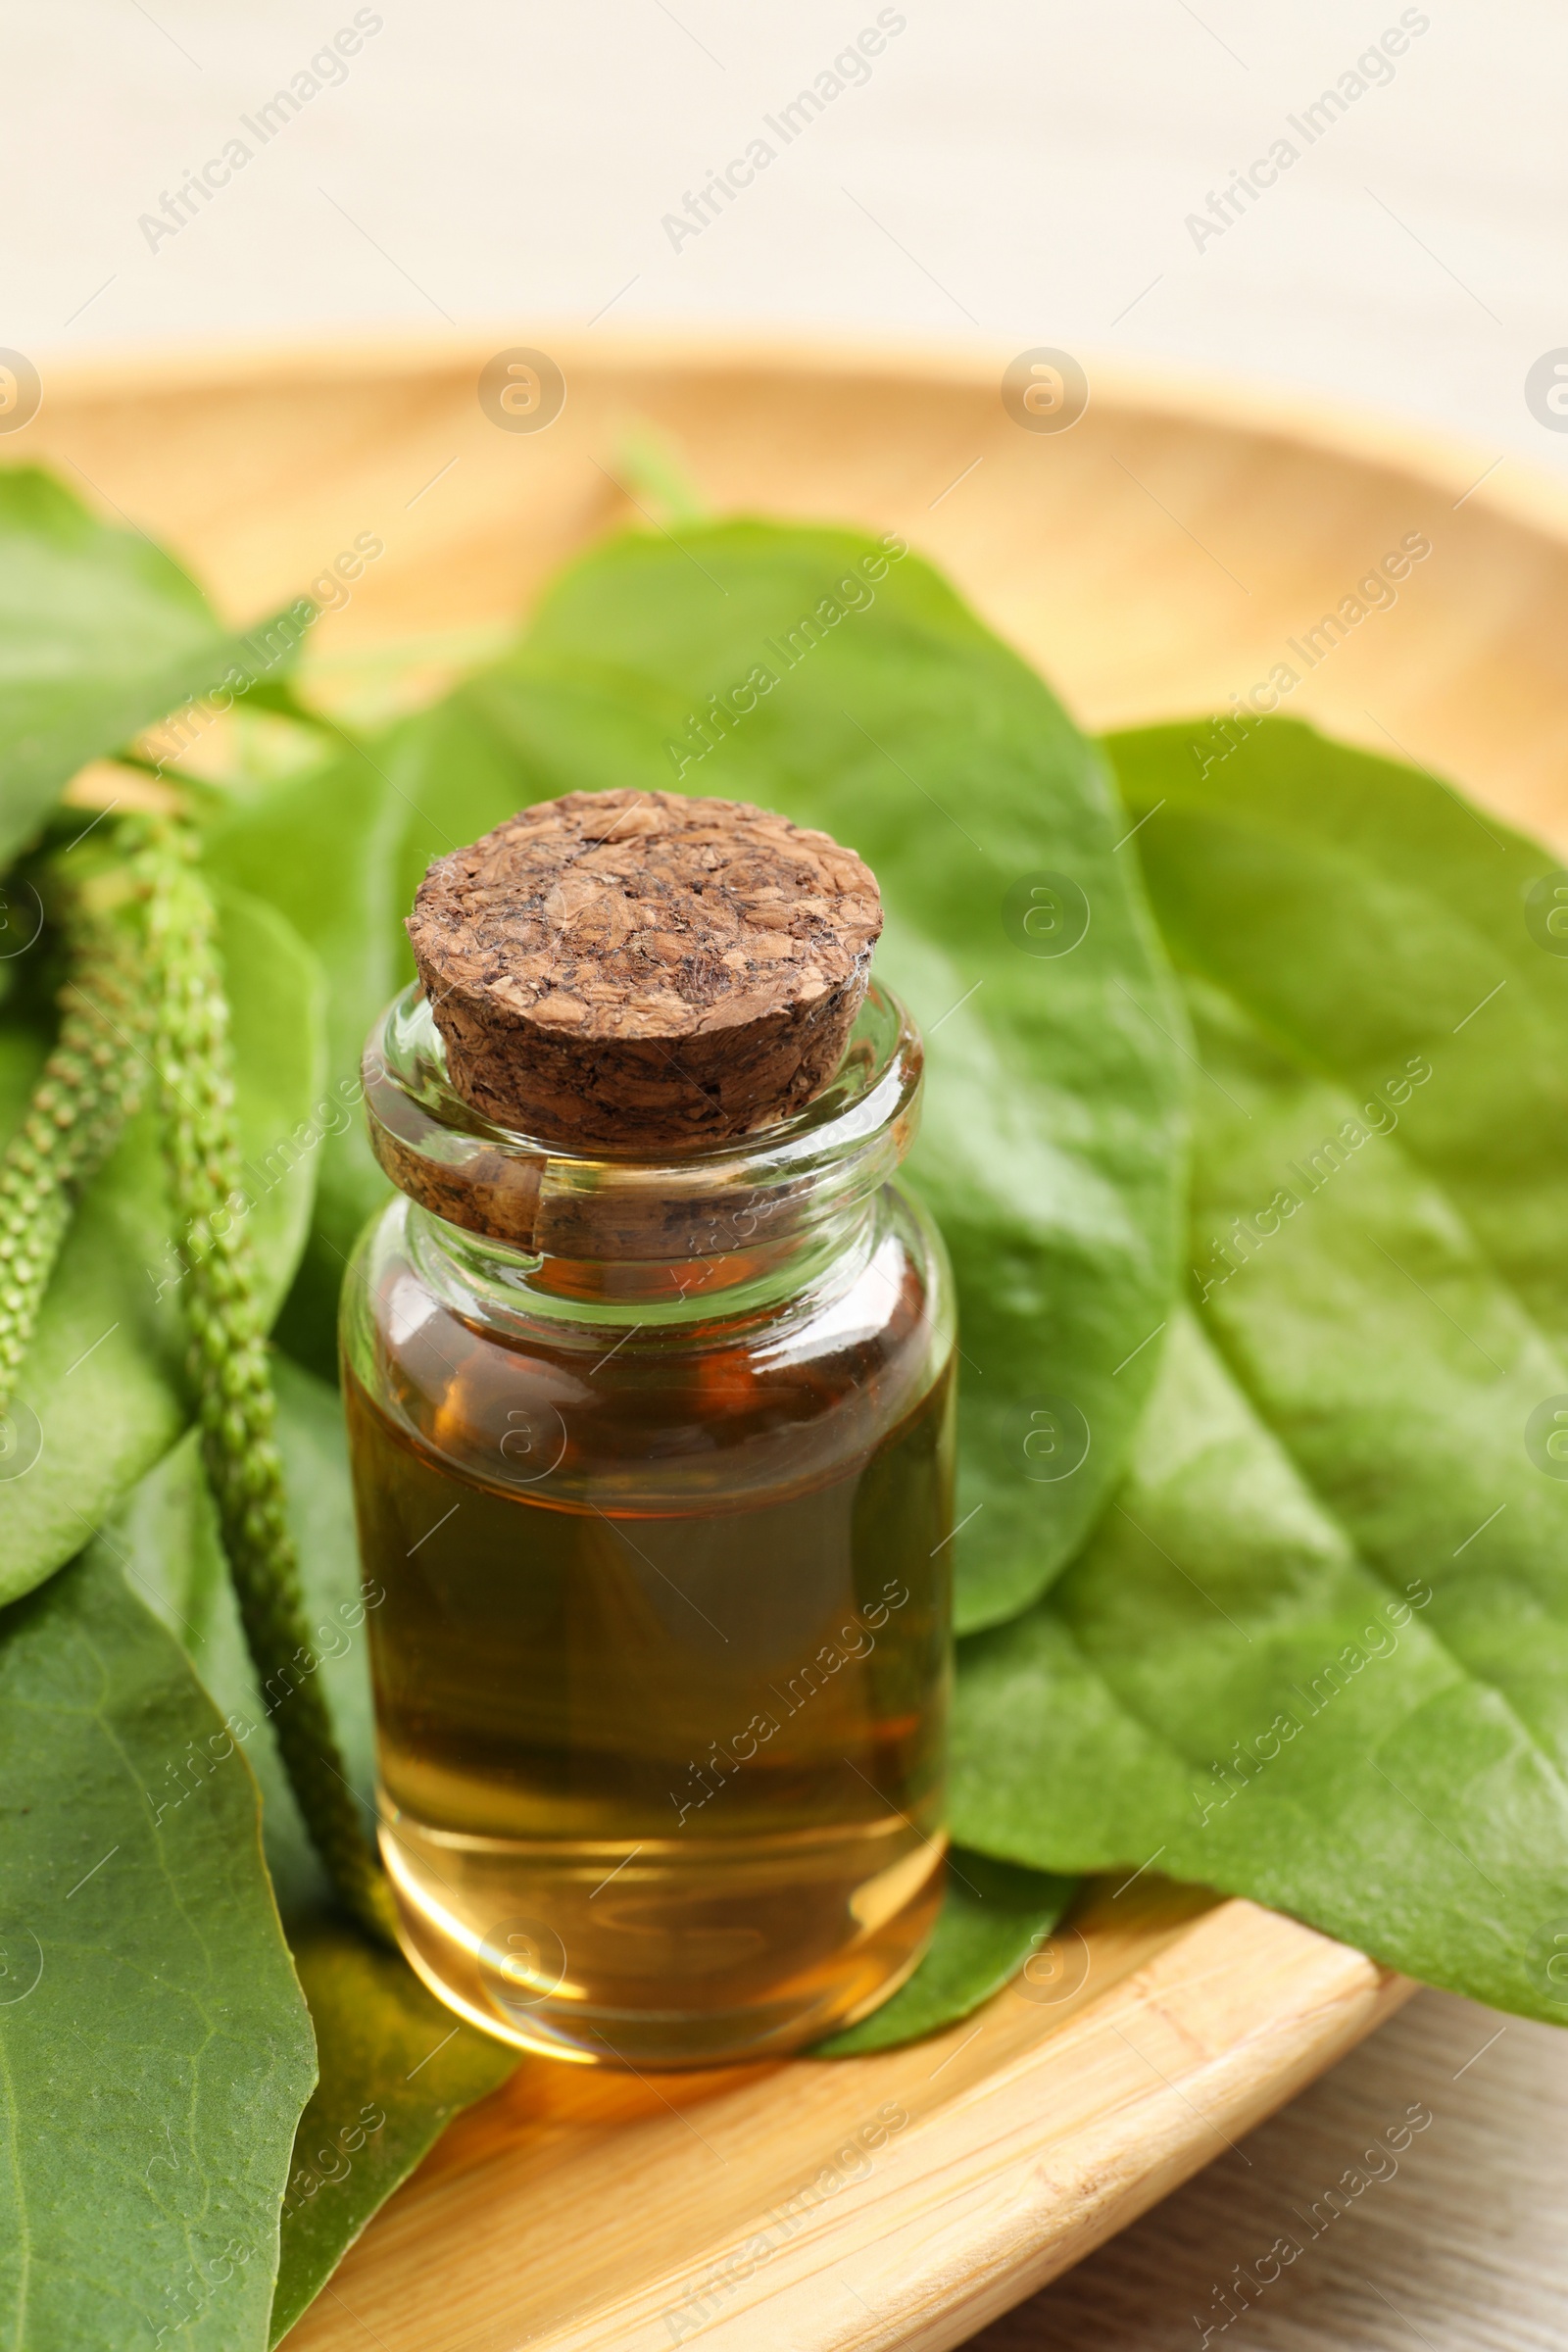 Photo of Bottle of broadleaf plantain extract and leaves on wooden plate, closeup